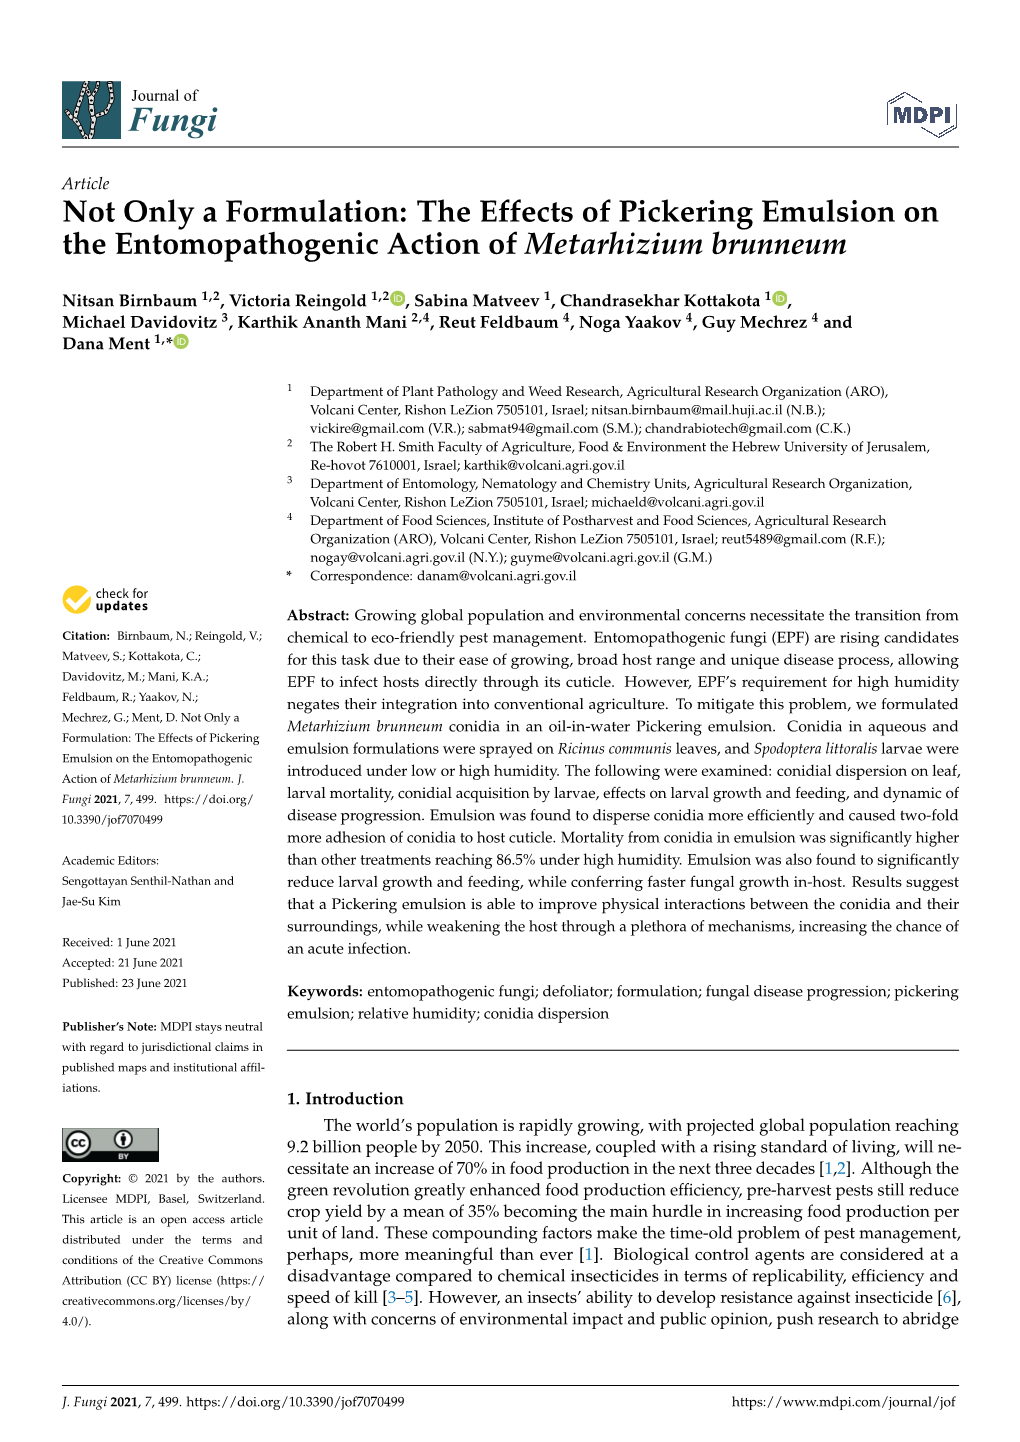 Not Only a Formulation: the Effects of Pickering Emulsion on the Entomopathogenic Action of Metarhizium Brunneum